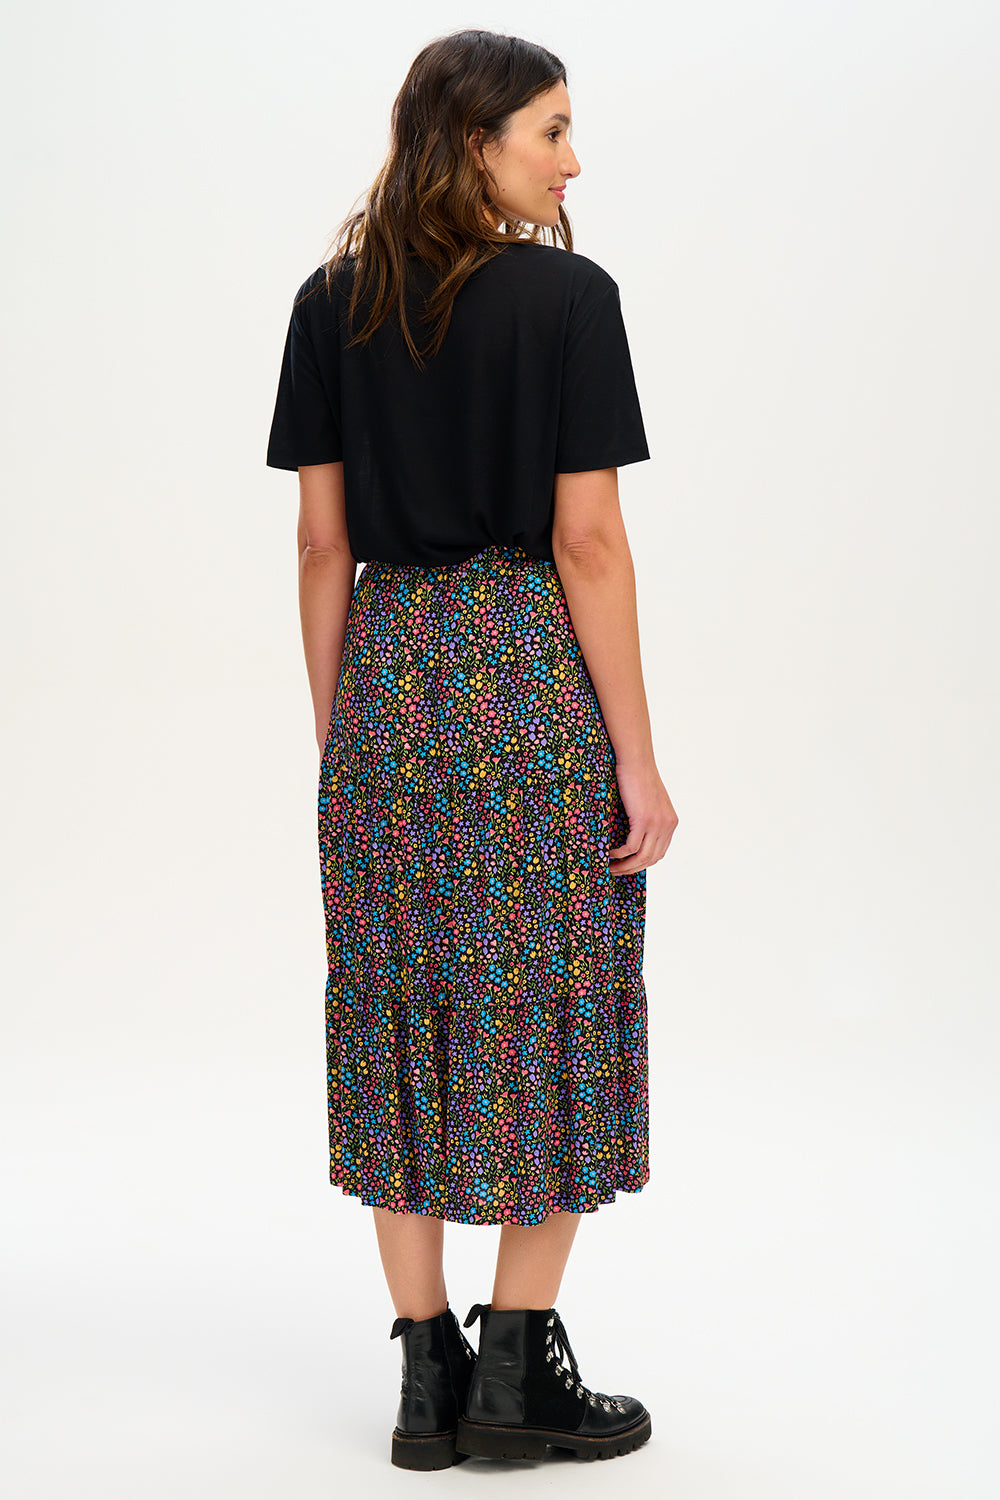 Felicity Tiered Skirt - Black/Multi, Ditsy Floral